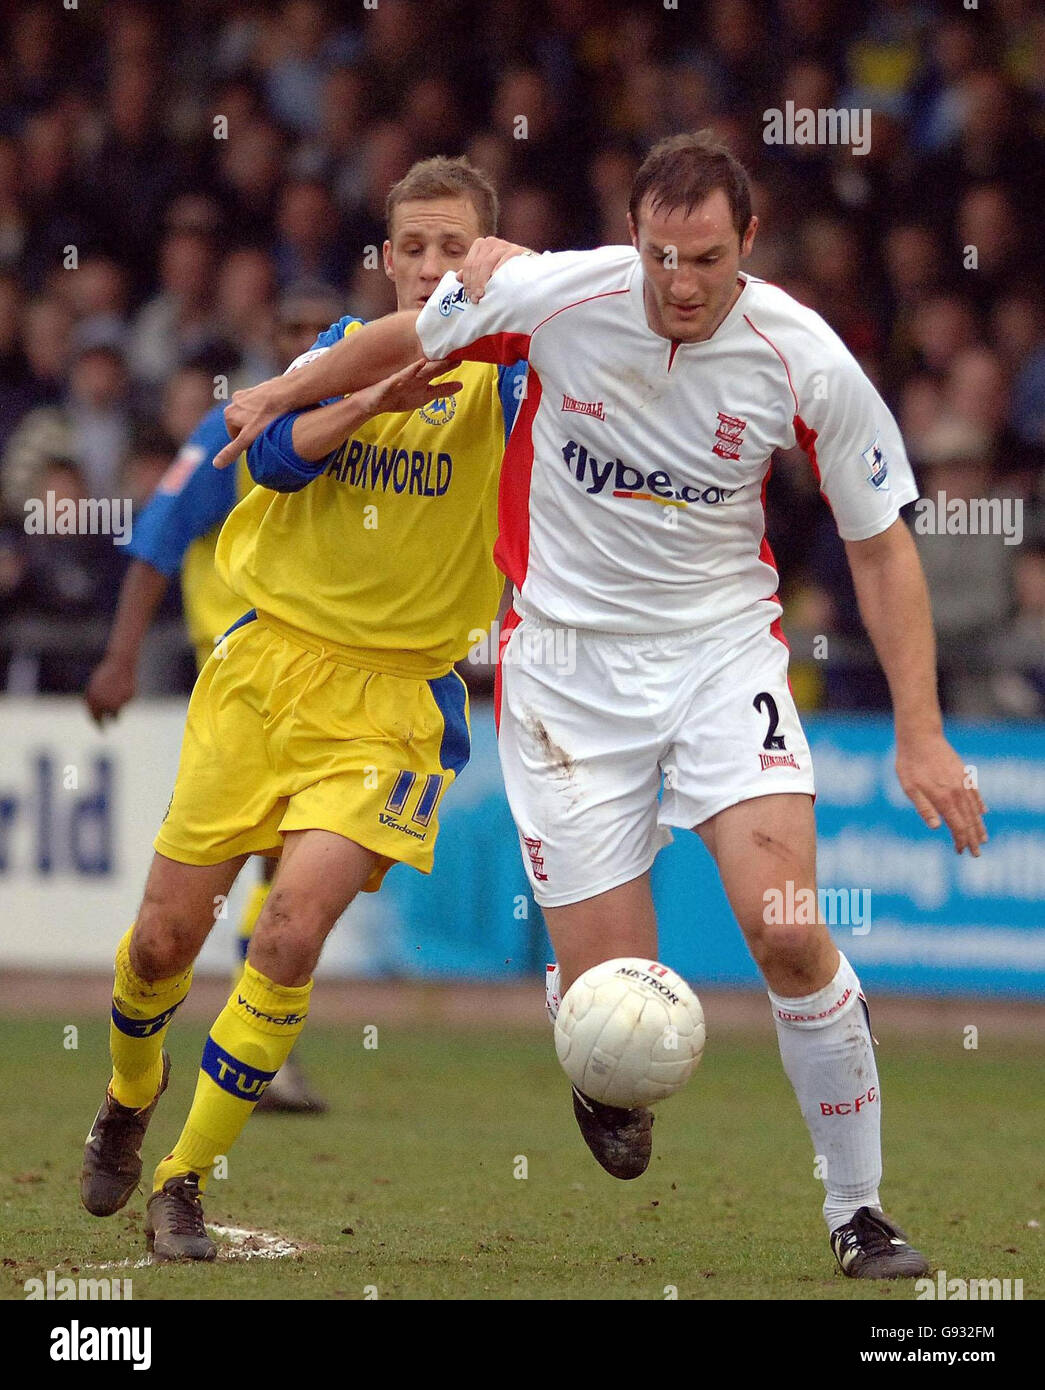 Birmingham City's Martin Taylor (R) holds the ball away from Torquay's Kevin Hill during the FA Cup Third Round match at Plainmoor, Torquay, Saturday January 7, 2006. PRESS ASSOCIATION Photo. Photo credit should read: Neil Munns/PA. Stock Photo